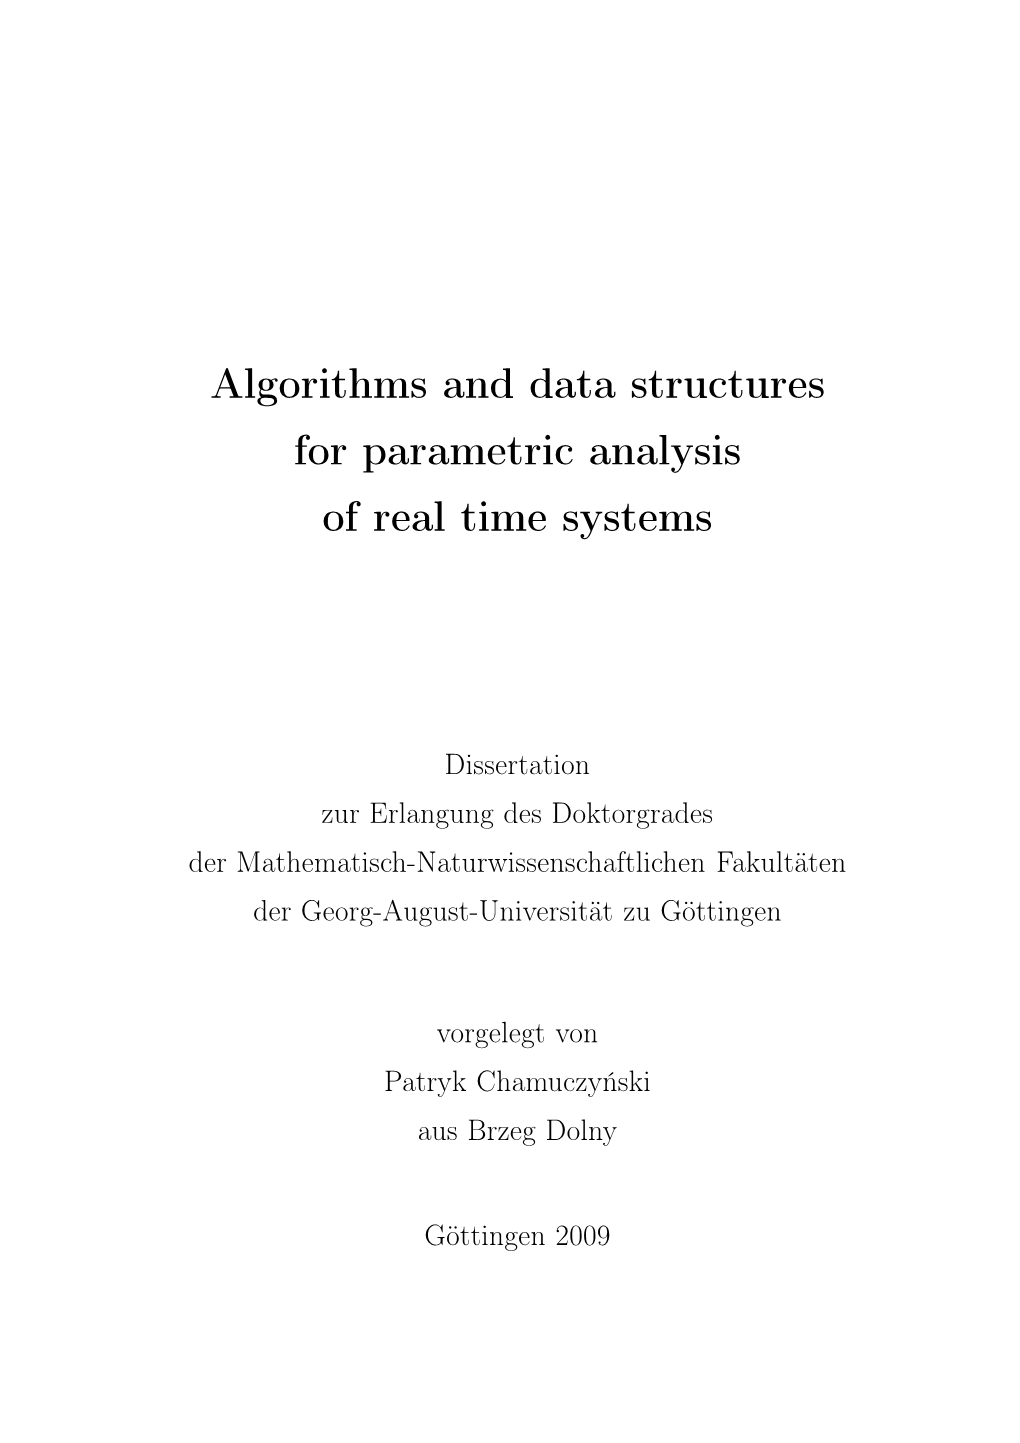 Algorithms and Data Structures for Parametric Analysis of Real Time Systems